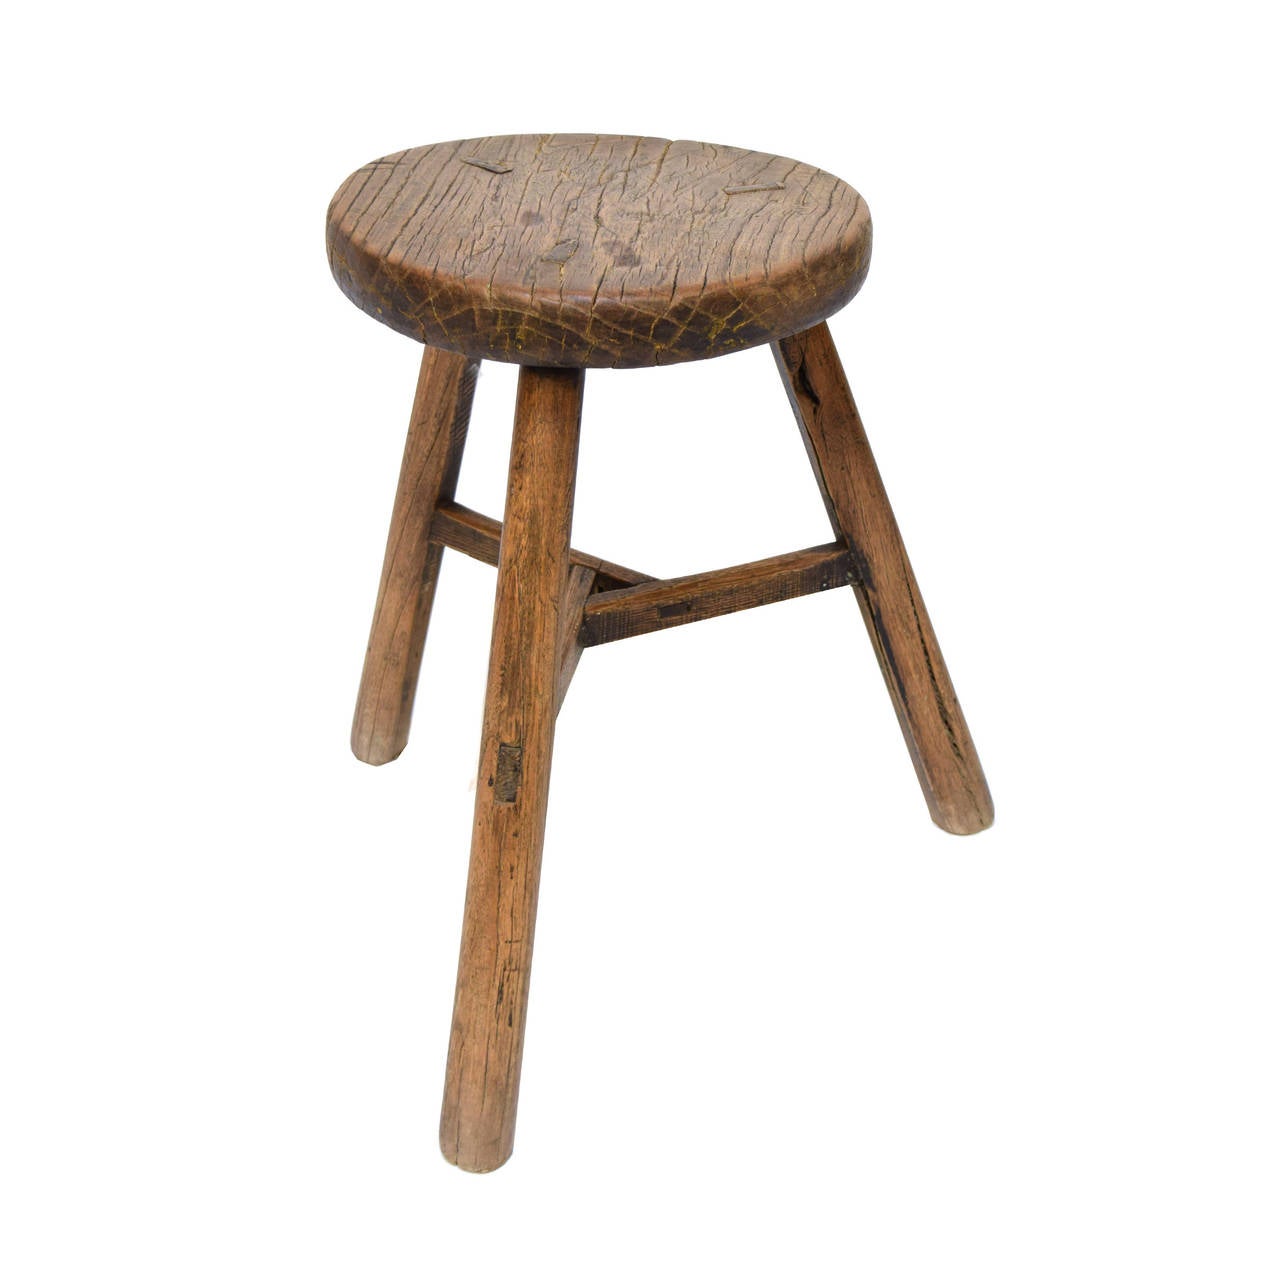 A round top stool with three legs from Northern China made of Chinese northern elm, circa 1850.